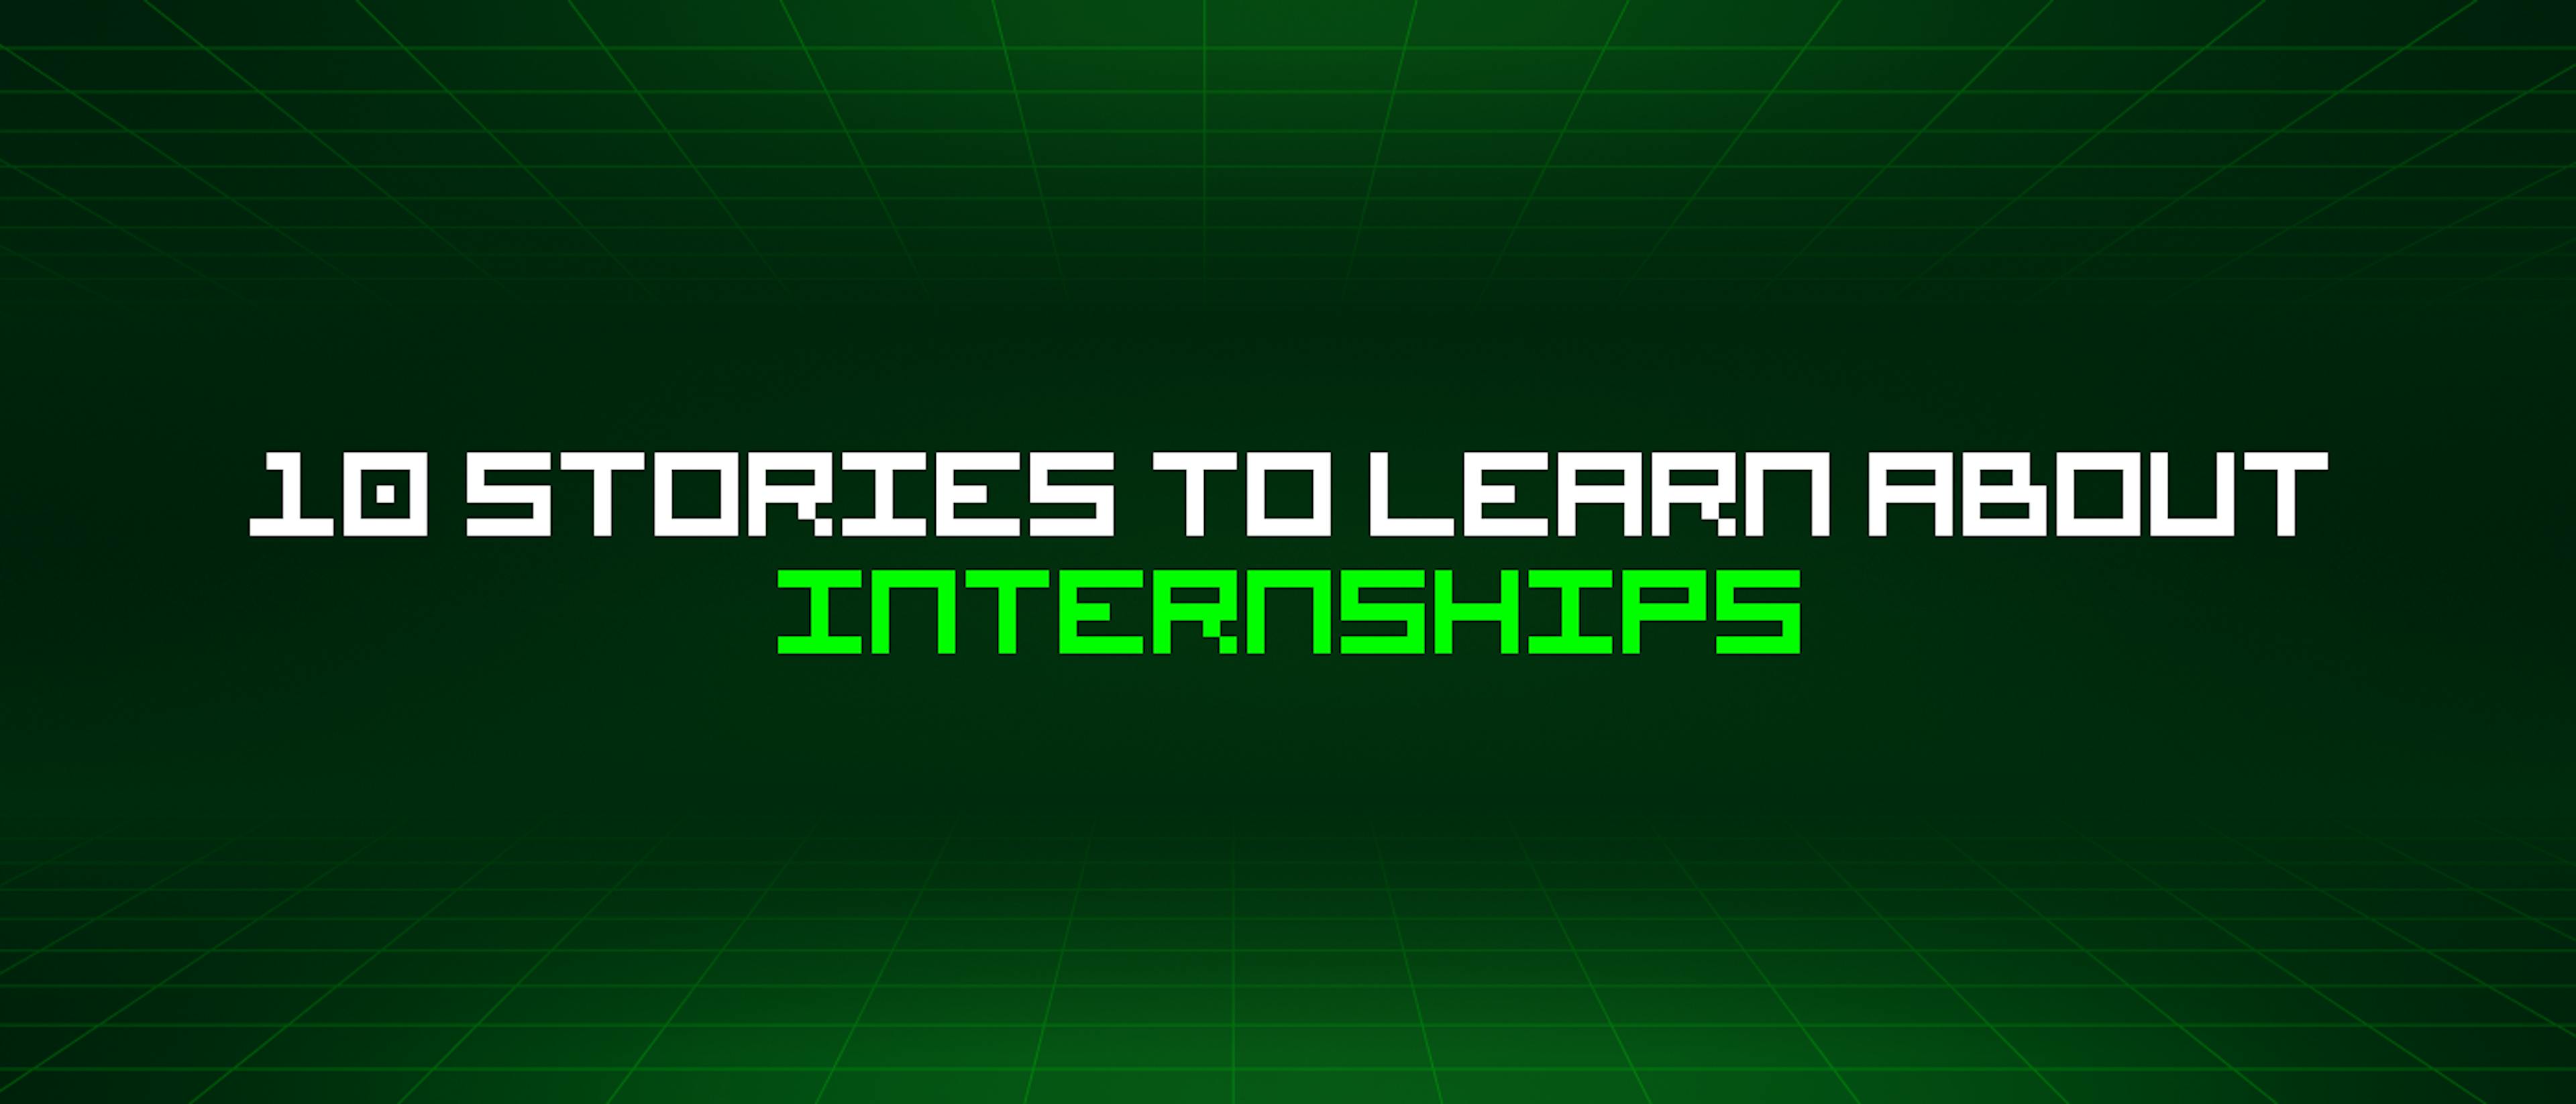 featured image - 10 Stories To Learn About Internships